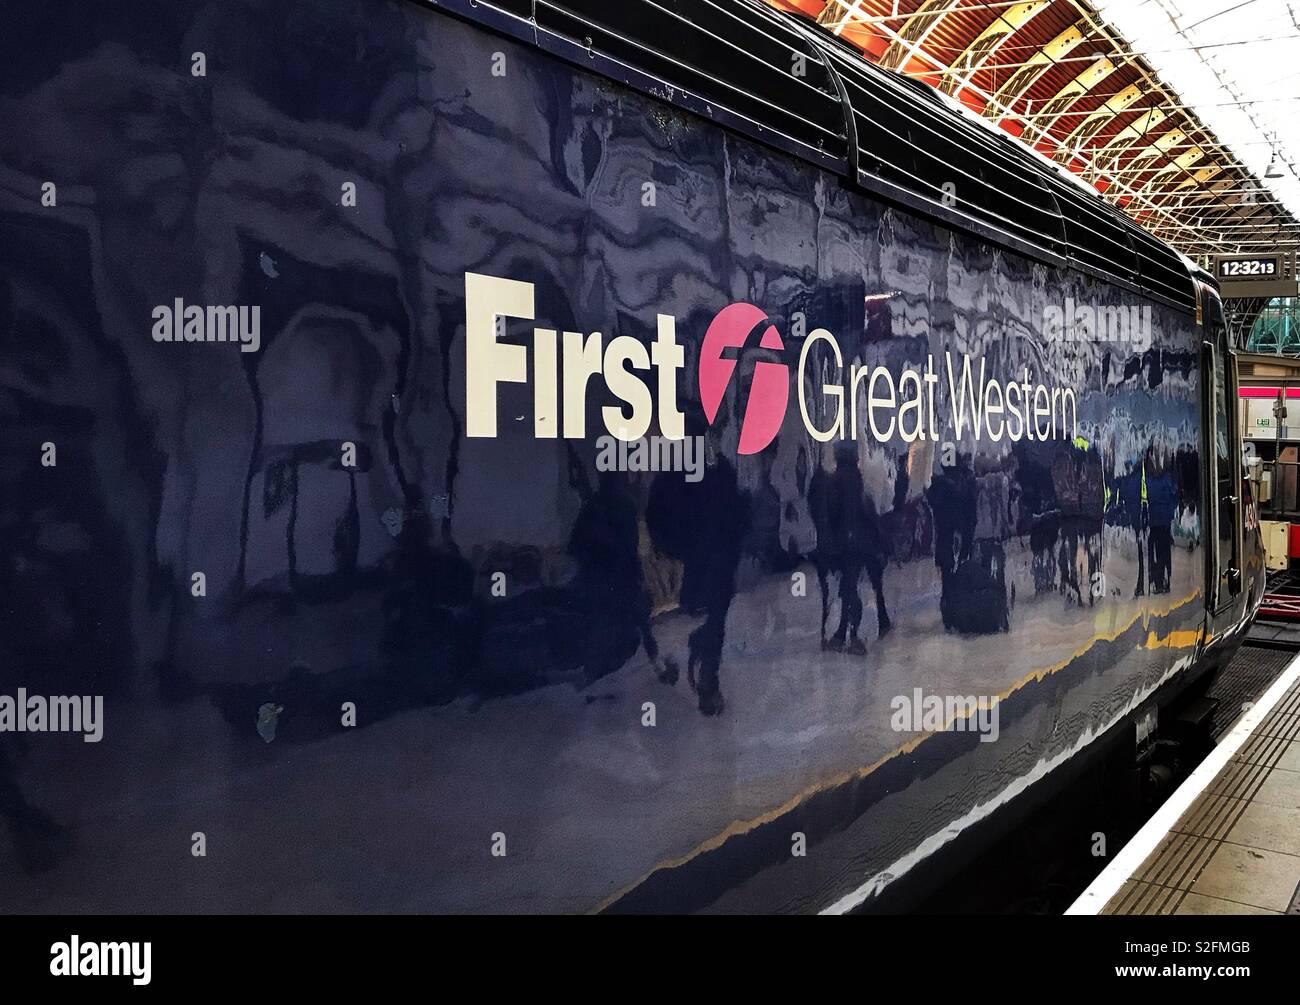 Passengers walking along a platform reflected in the shiny paintwork of a First Great Western diesel locomotive Stock Photo